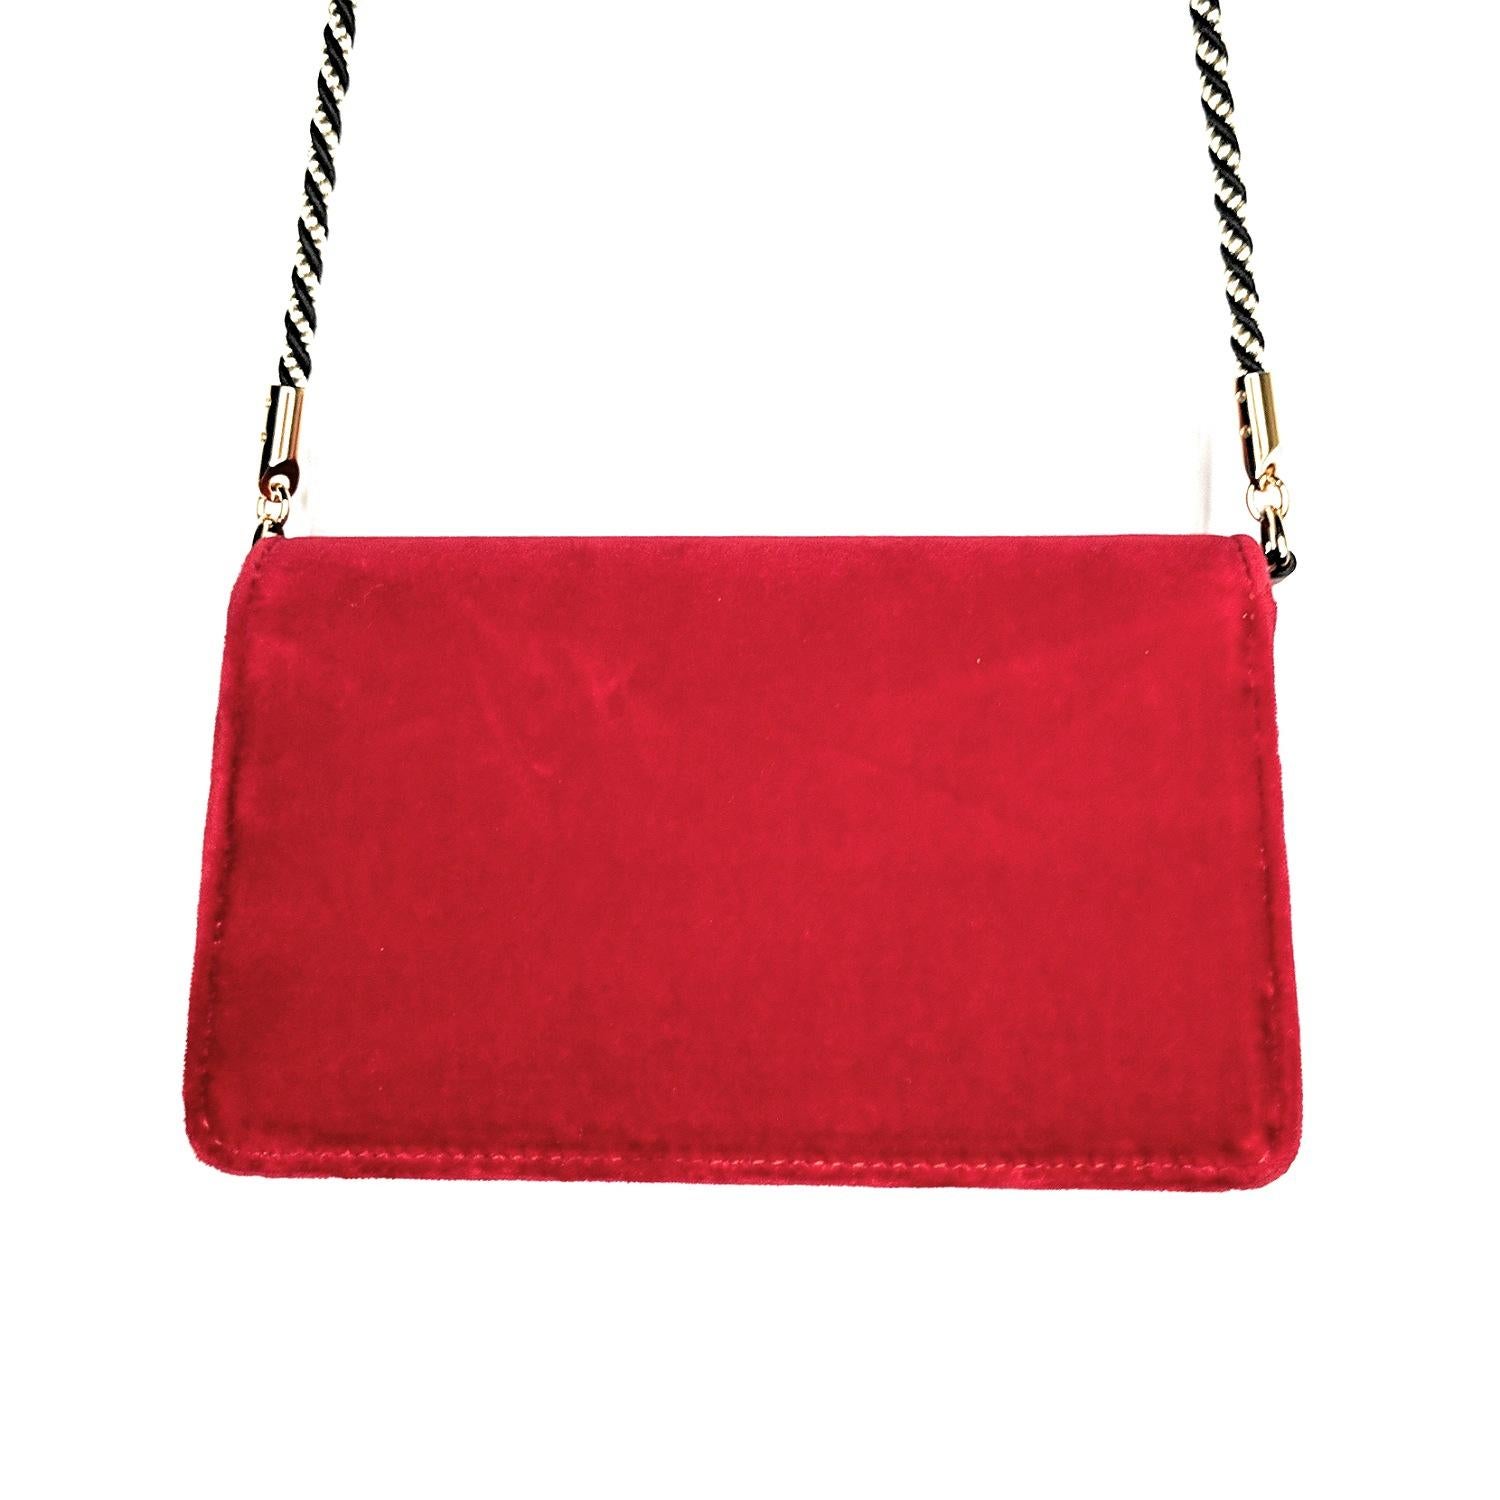 Red velvet Gucci Mini Broadway bag with multi-tonal hardware, single rolled shoulder strap with leather shoulder guard, pink satin lining and magnetic snap closure at front flap featuring crystal-embellished adornment. Retail price is